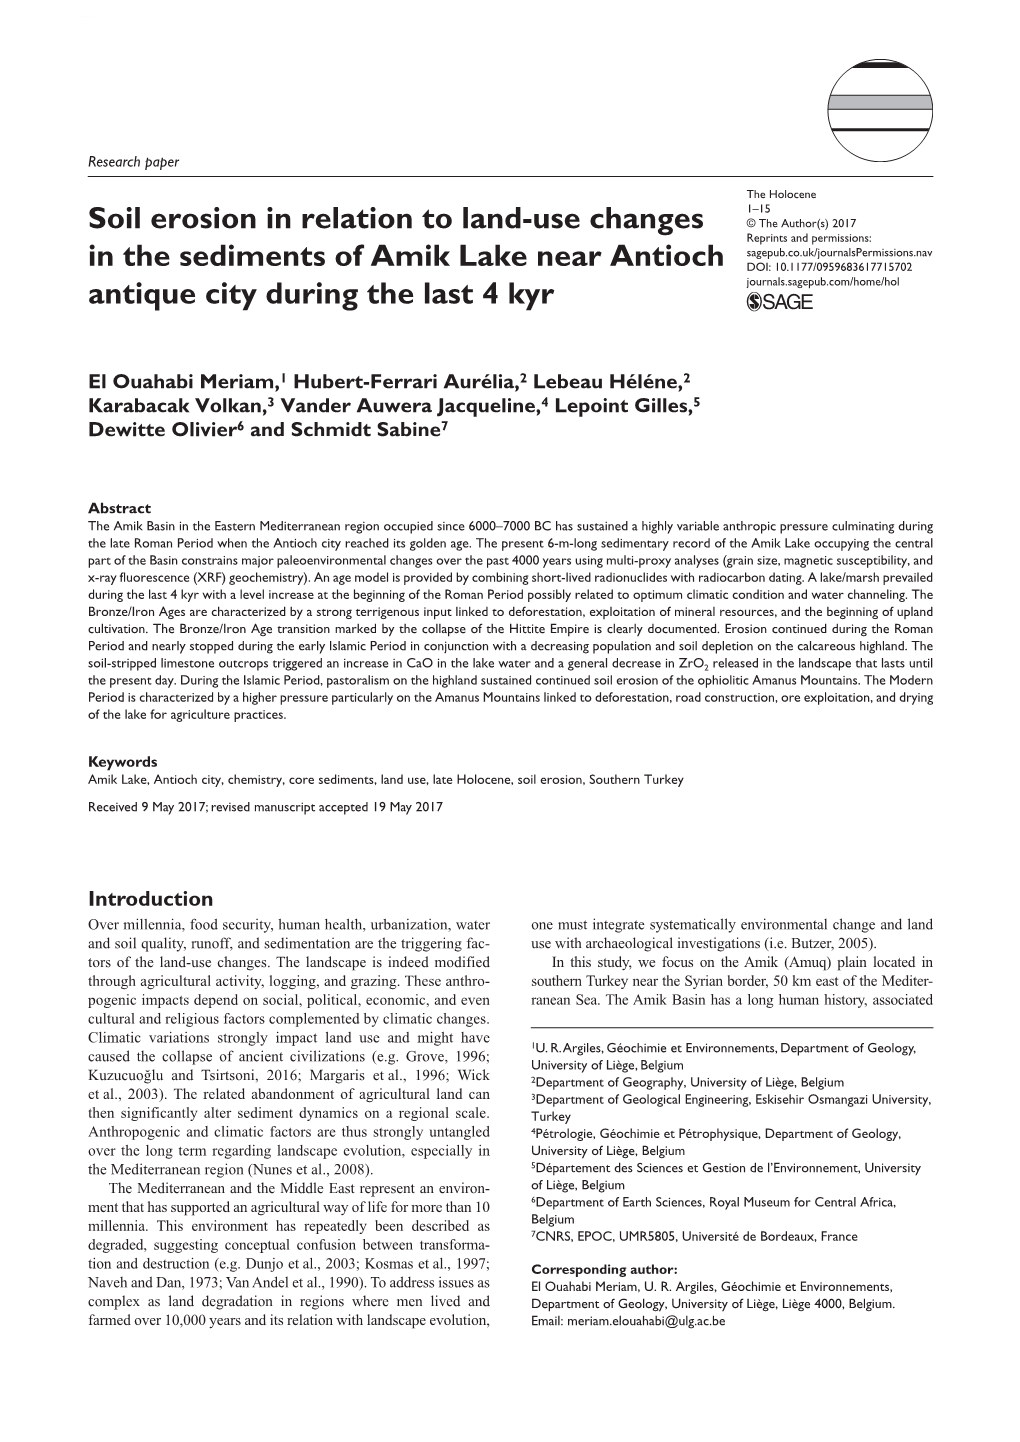 Soil Erosion in Relation to Land-Use Changes in the Sediments of Amik